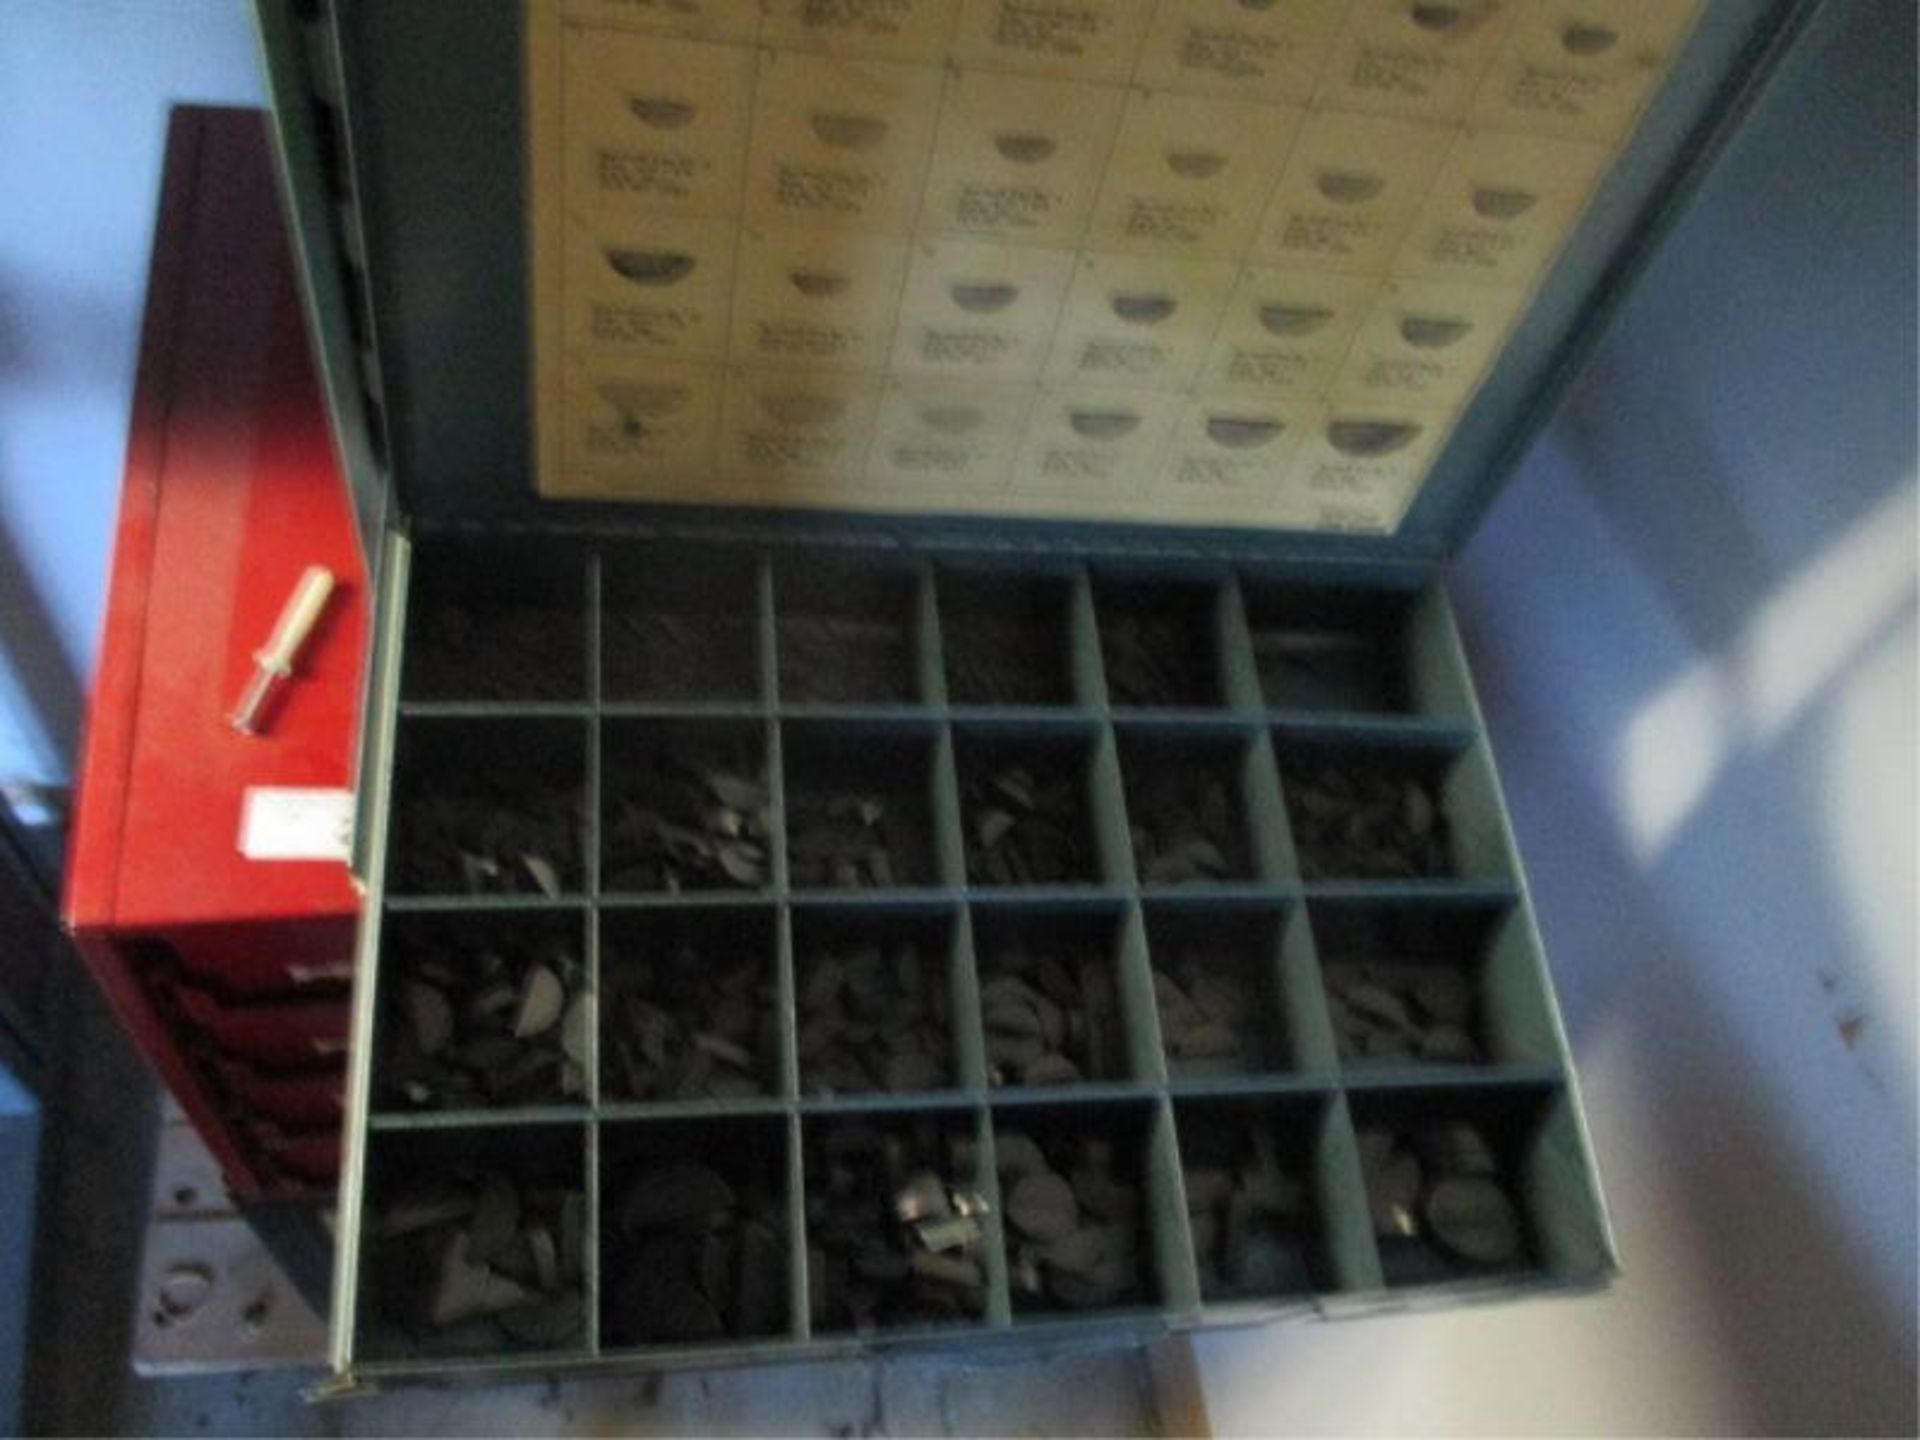 6 Drawer Curtis Hardware Cabinet w/ Nuts, Bolts, Wing Nuts, Woodruff Keys & Grease Fittings - Image 6 of 7